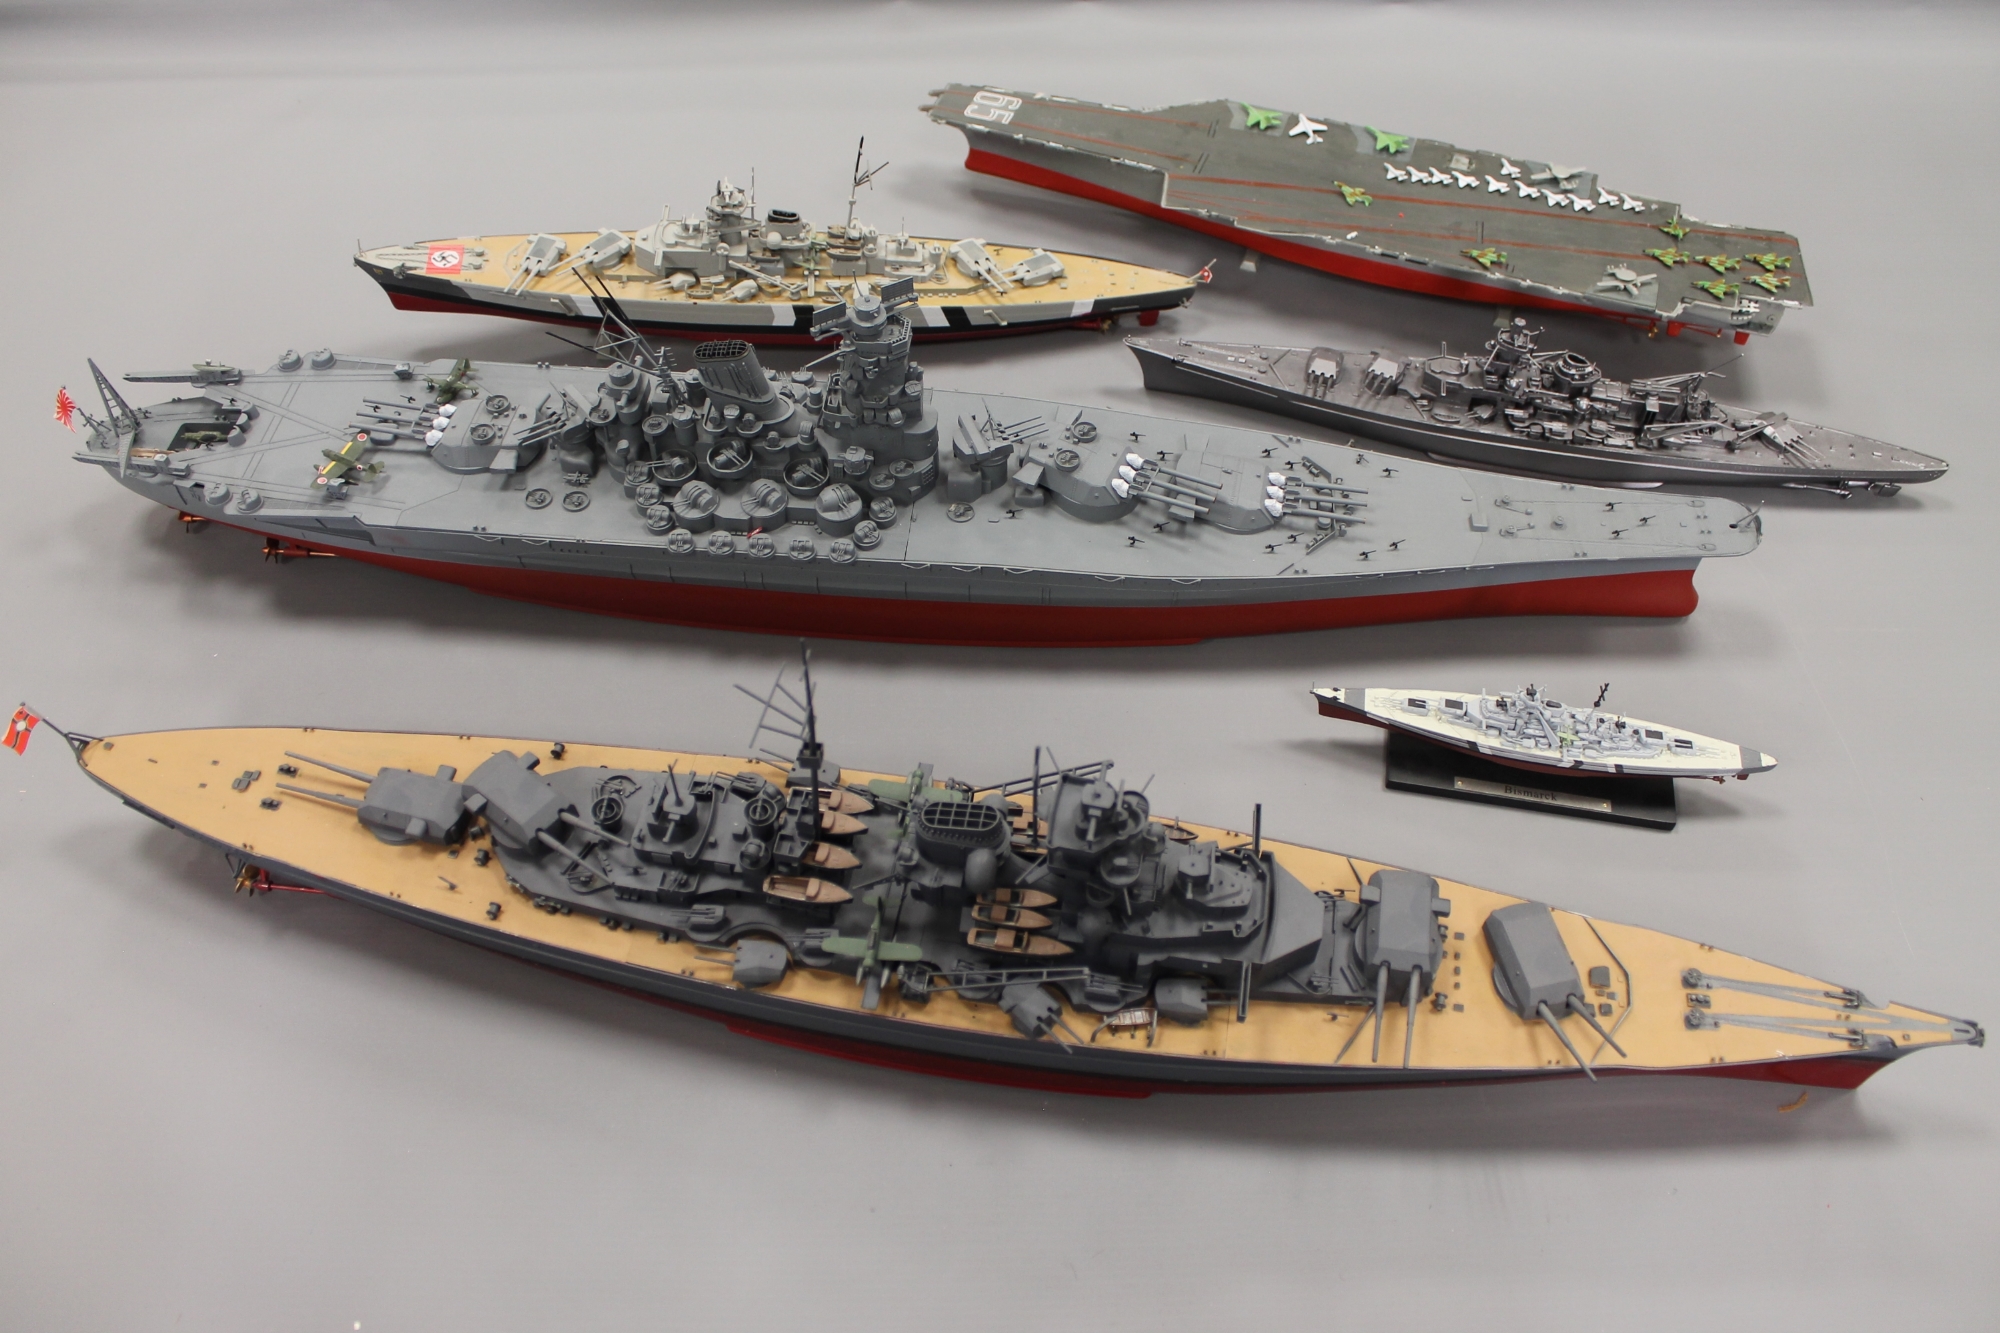 A collection of military model war ships and aircraft carriers.